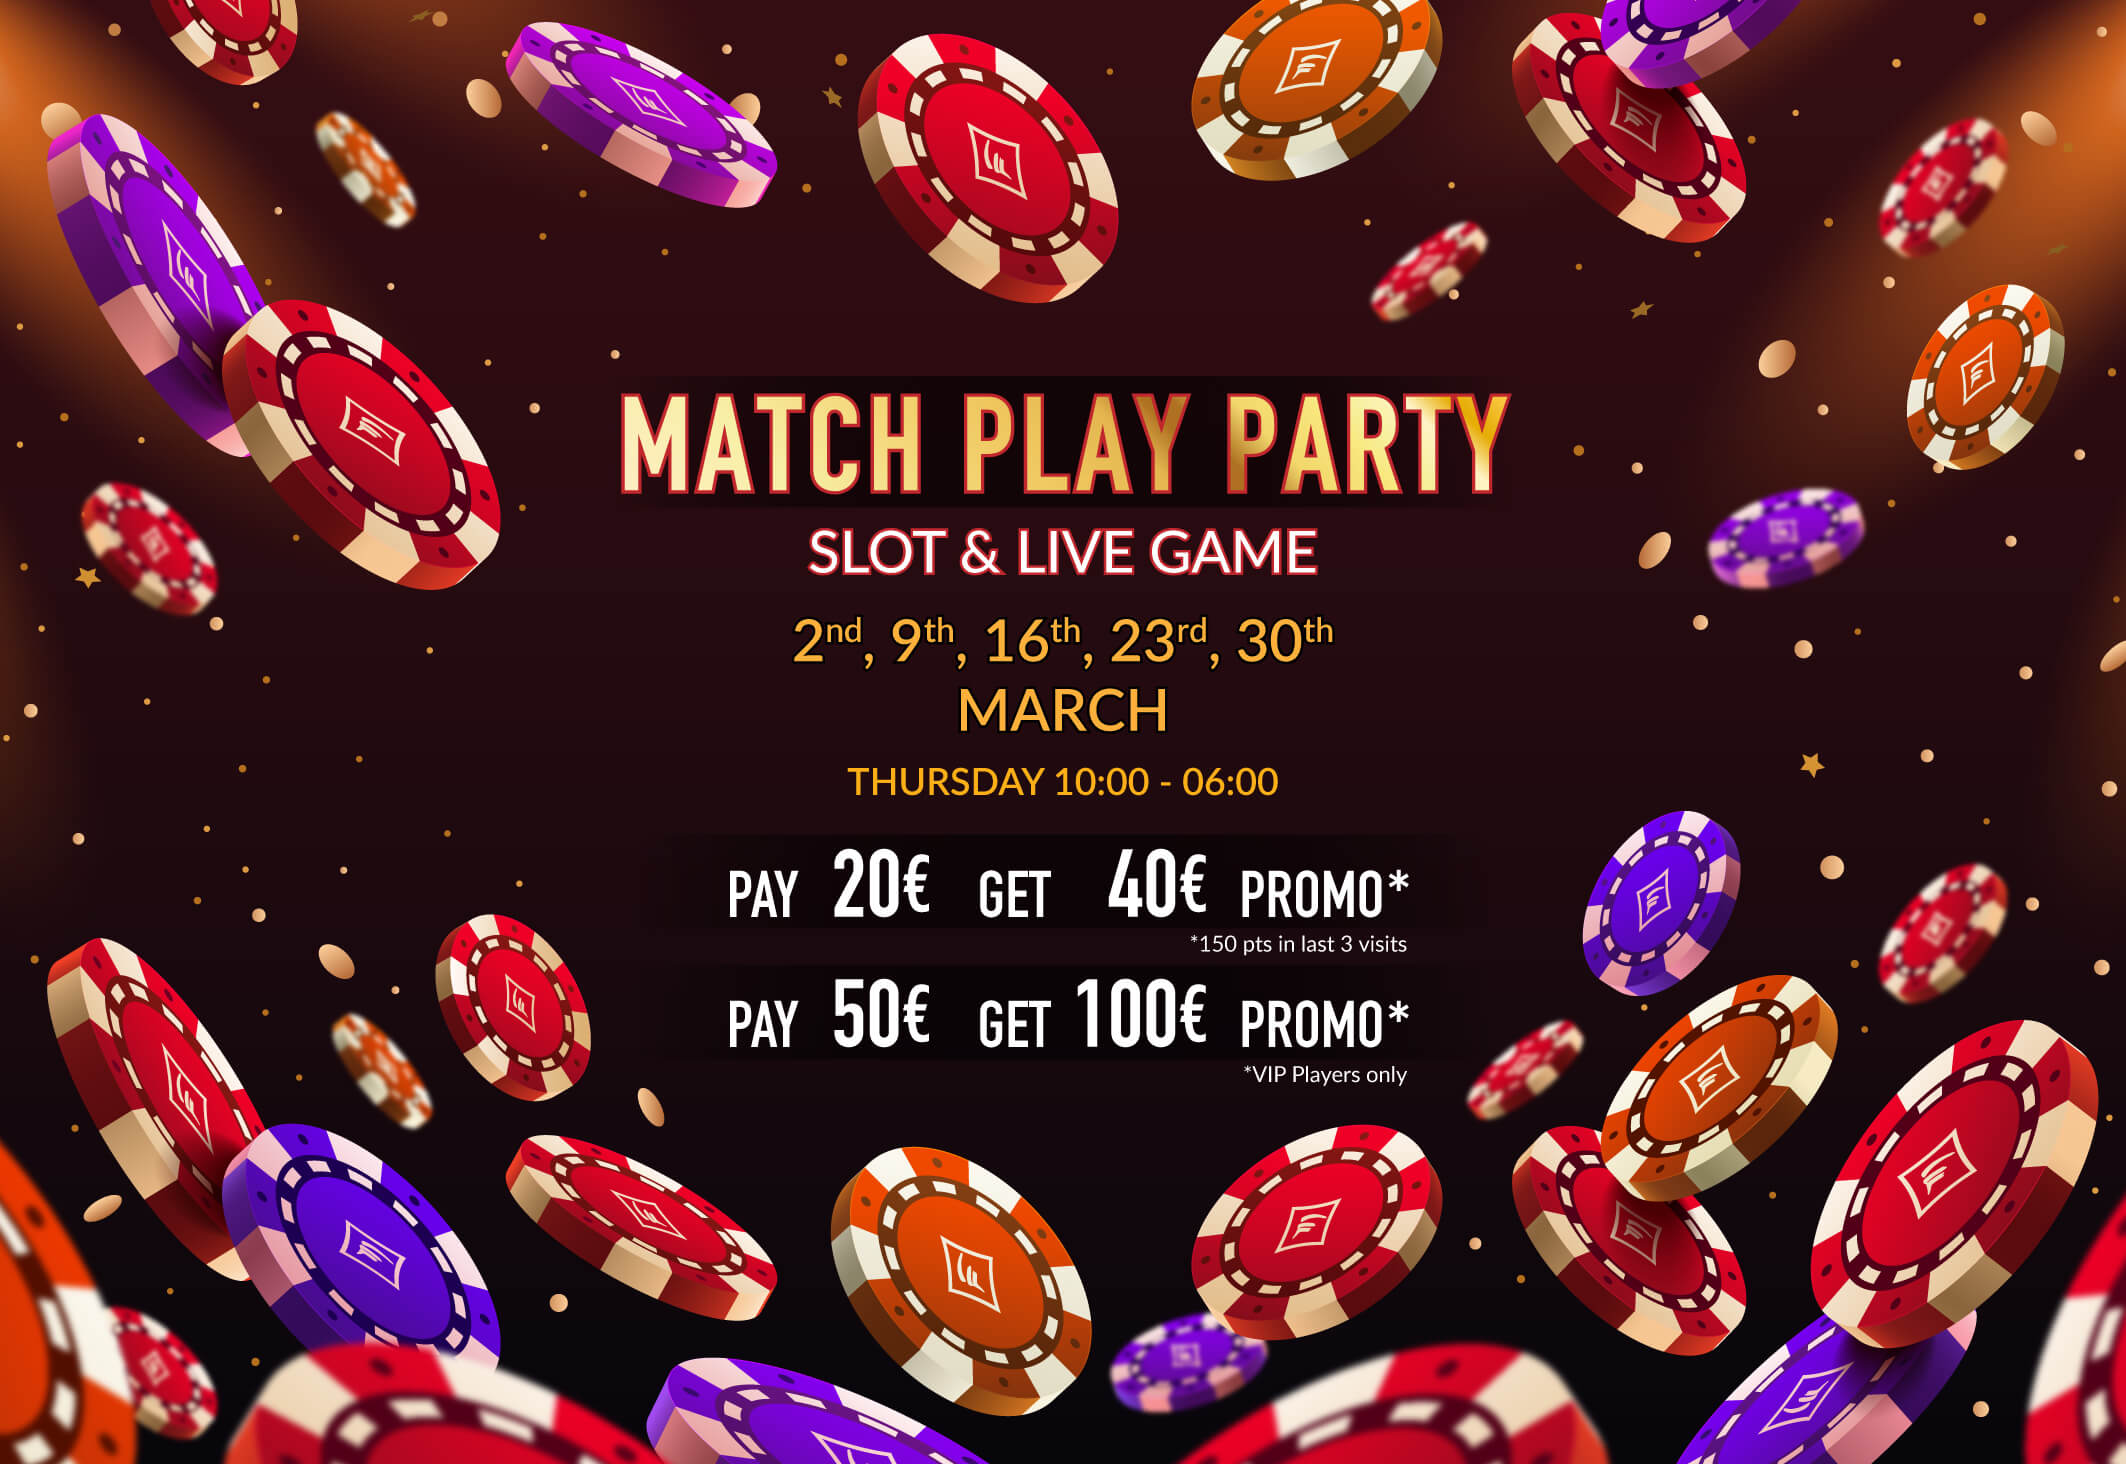 MATCHPLAY PARTY